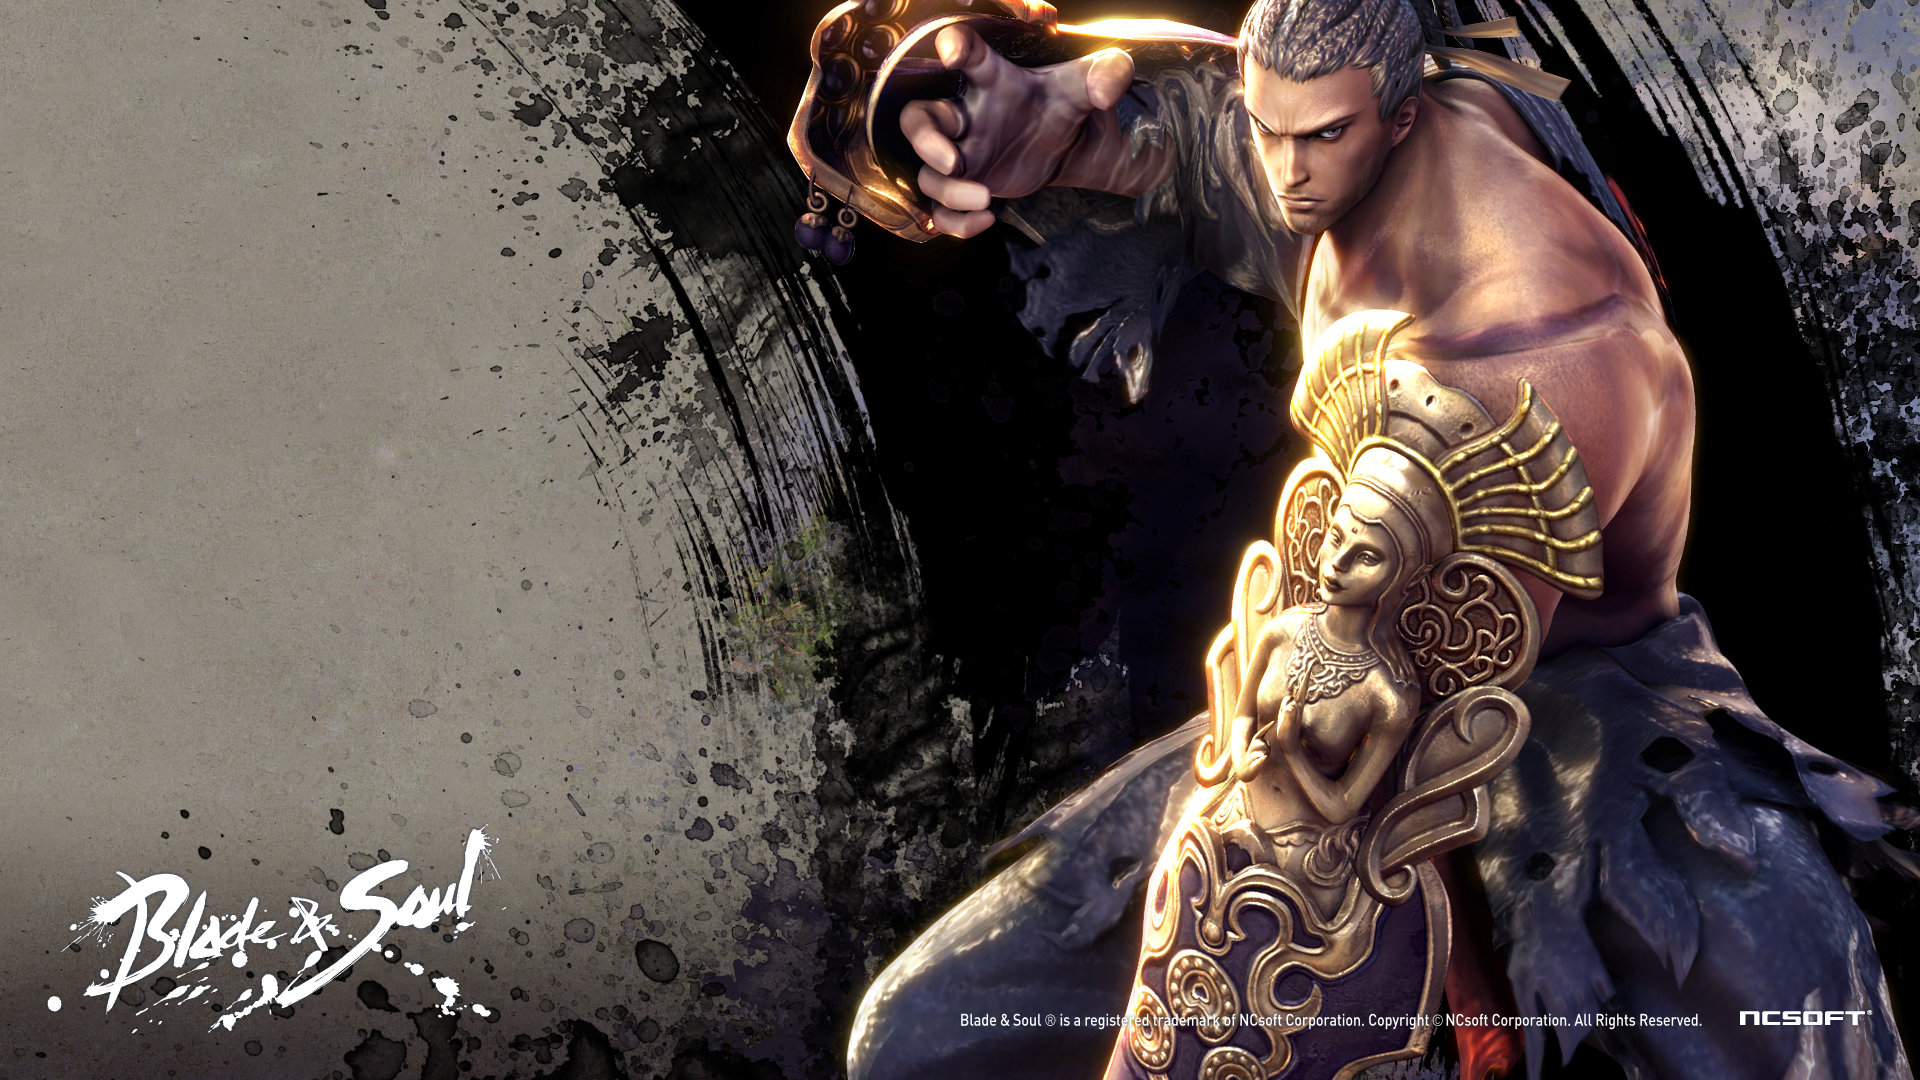 Download full hd 1920x1080 Blade and Soul desktop background ID:130013 for free